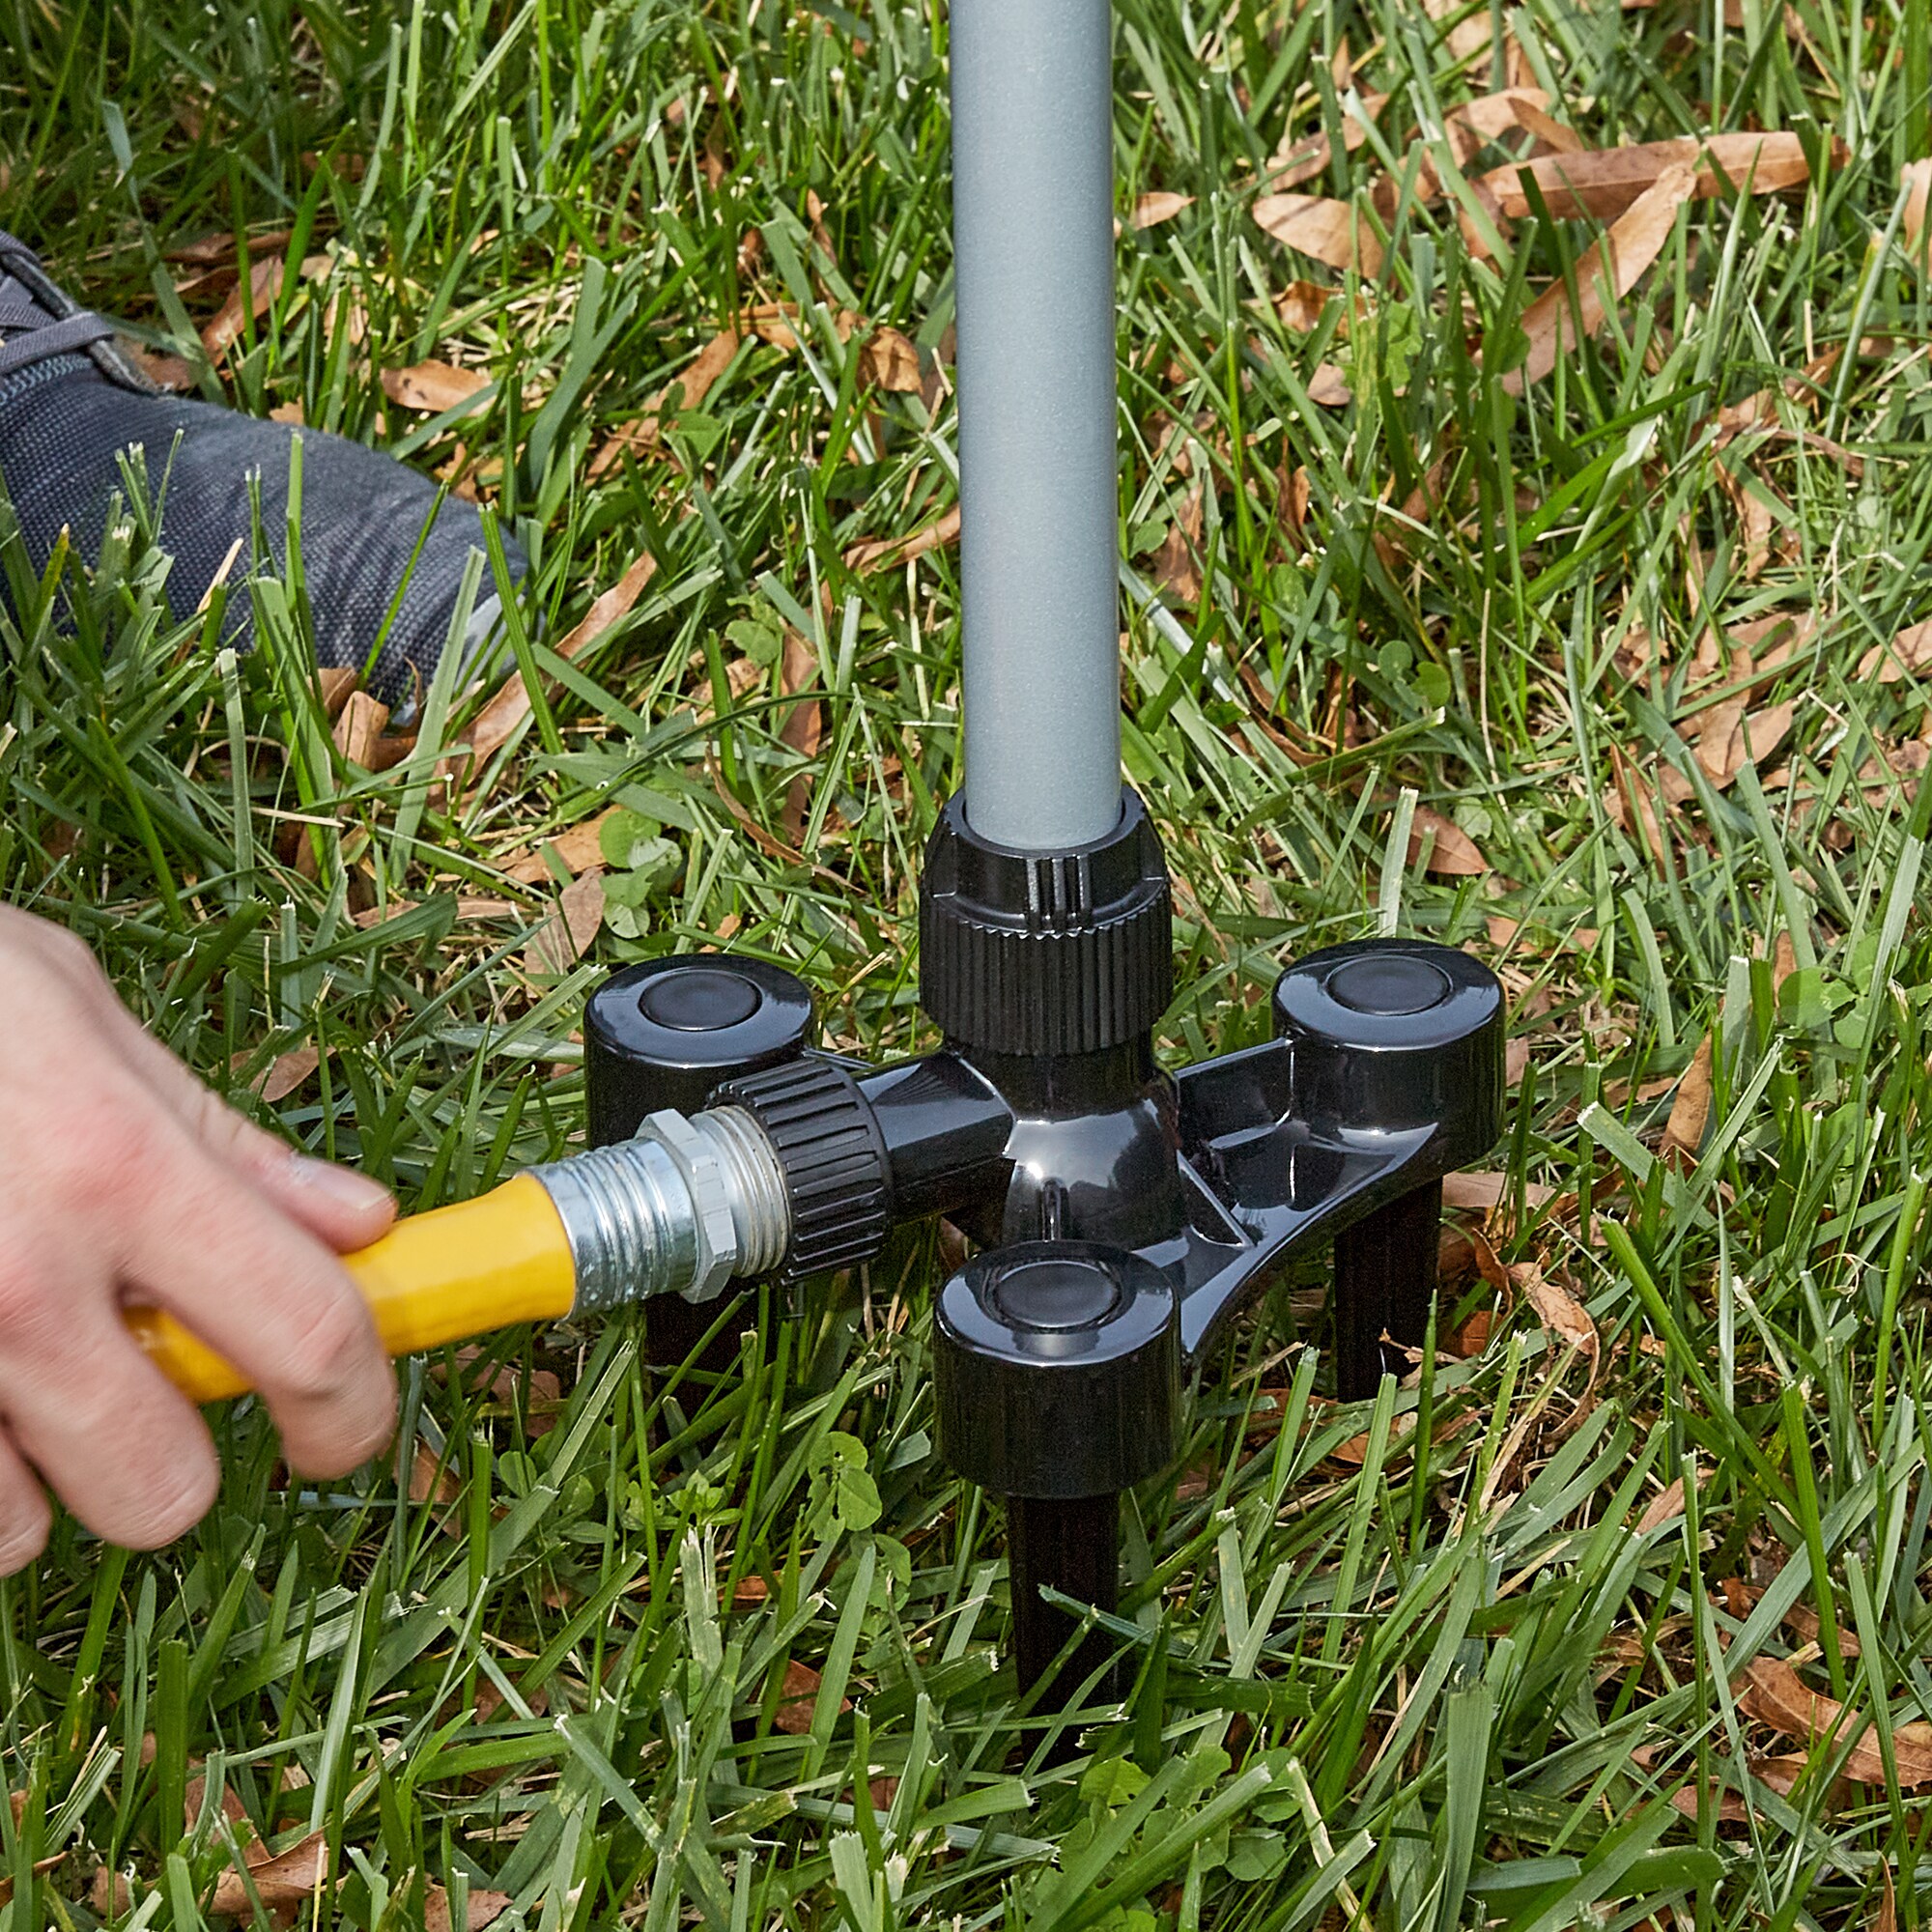 Lawn Garden Melnor Multi-Adjustable Sprinklers Hoses Kit Covers Up To 1 800 Sq. 